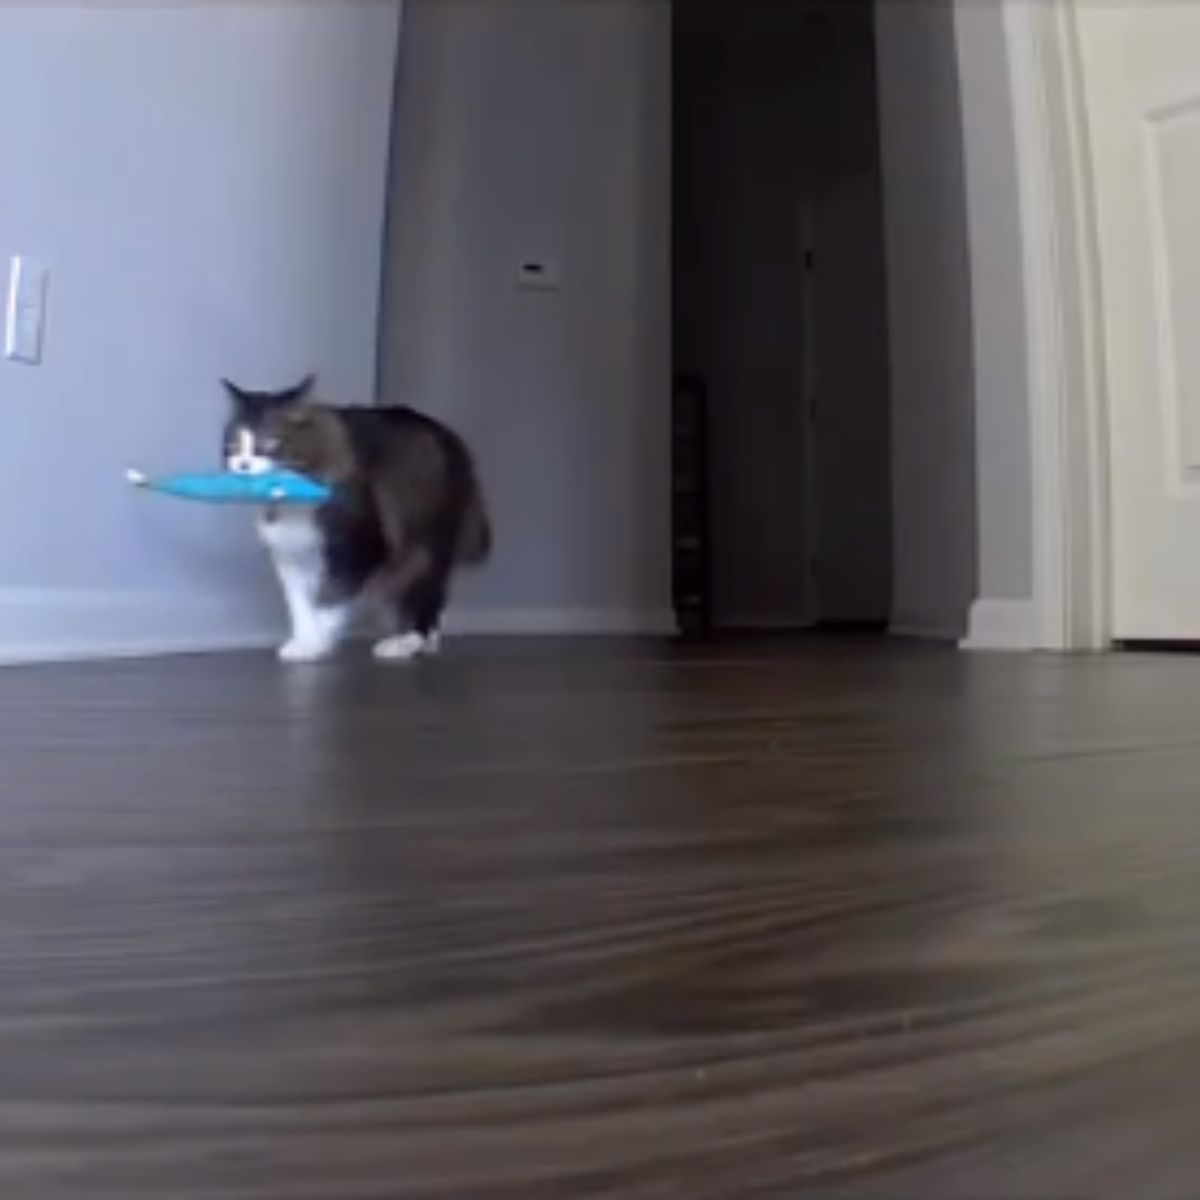 cat carrying a toy in its mouth